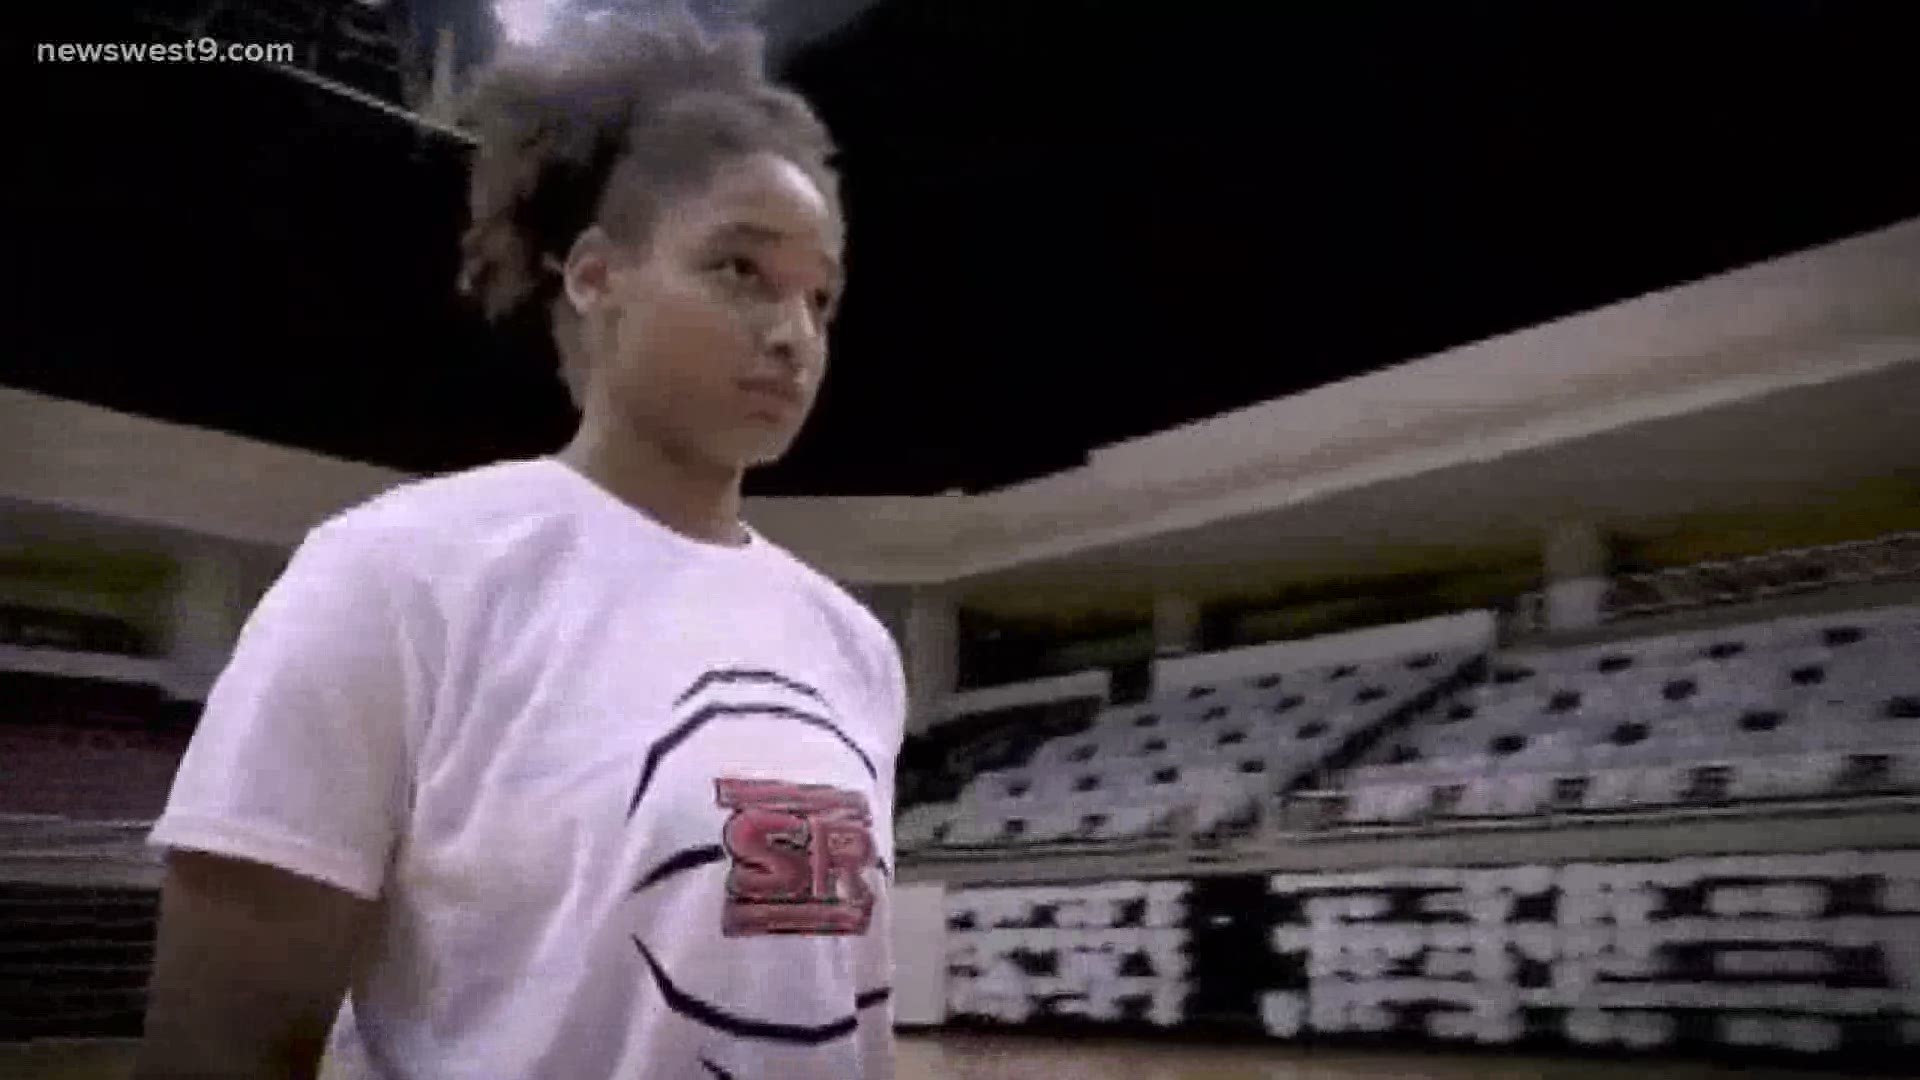 Lobos Women's Basketball student-athlete, Vania Hampton, shared her experience at Sul Ross as the university hopes to inspire positivity and school spirit.